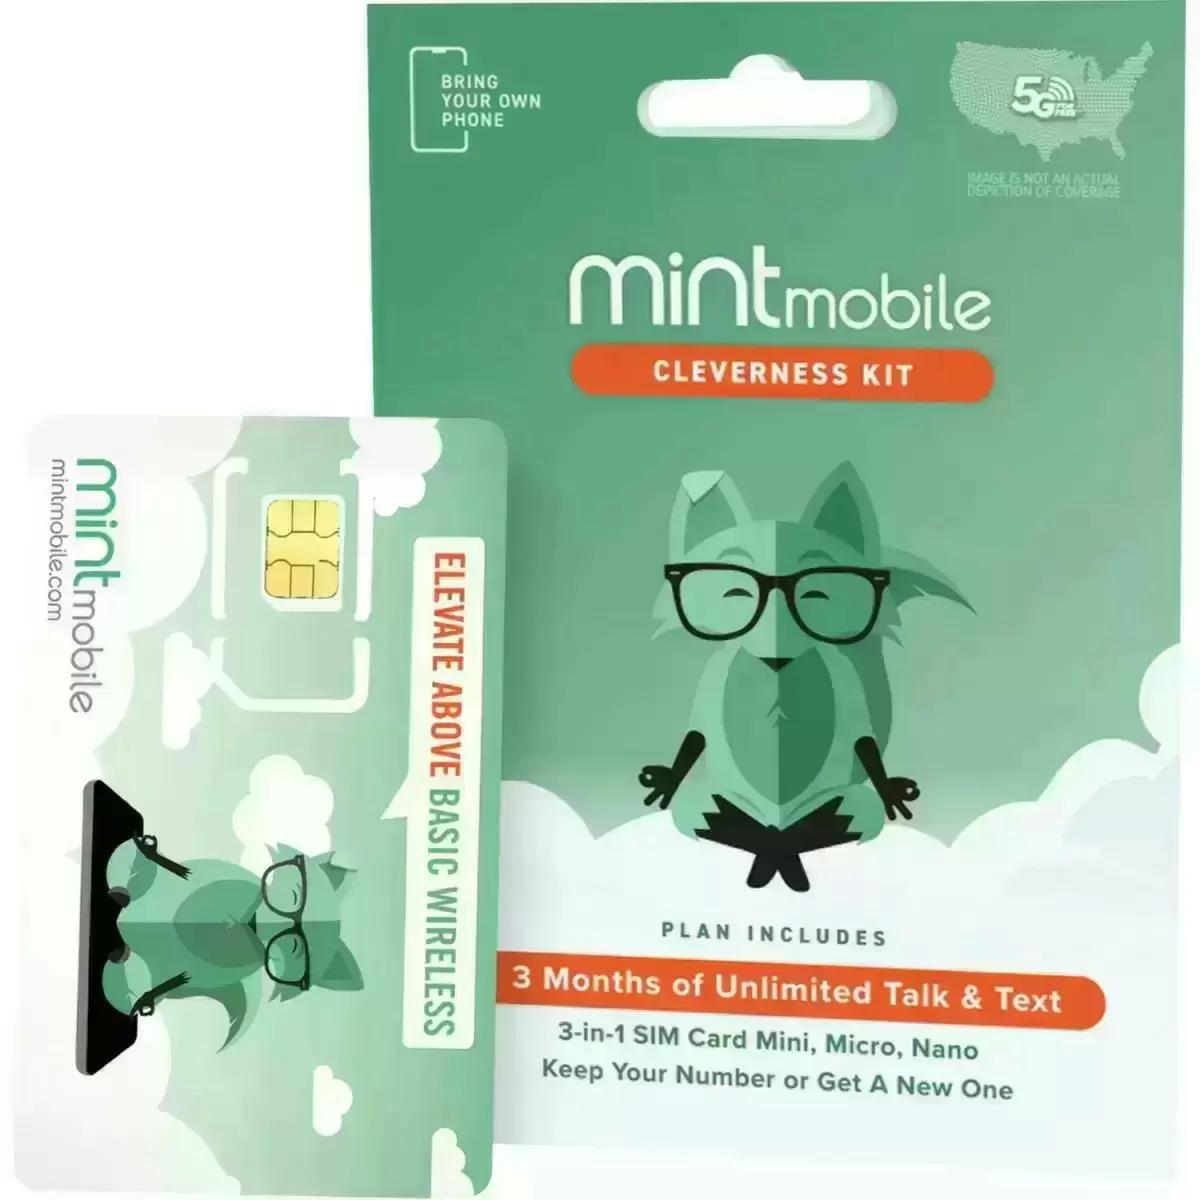 Mint Mobile Buy 6 Months of Cell Service from $45